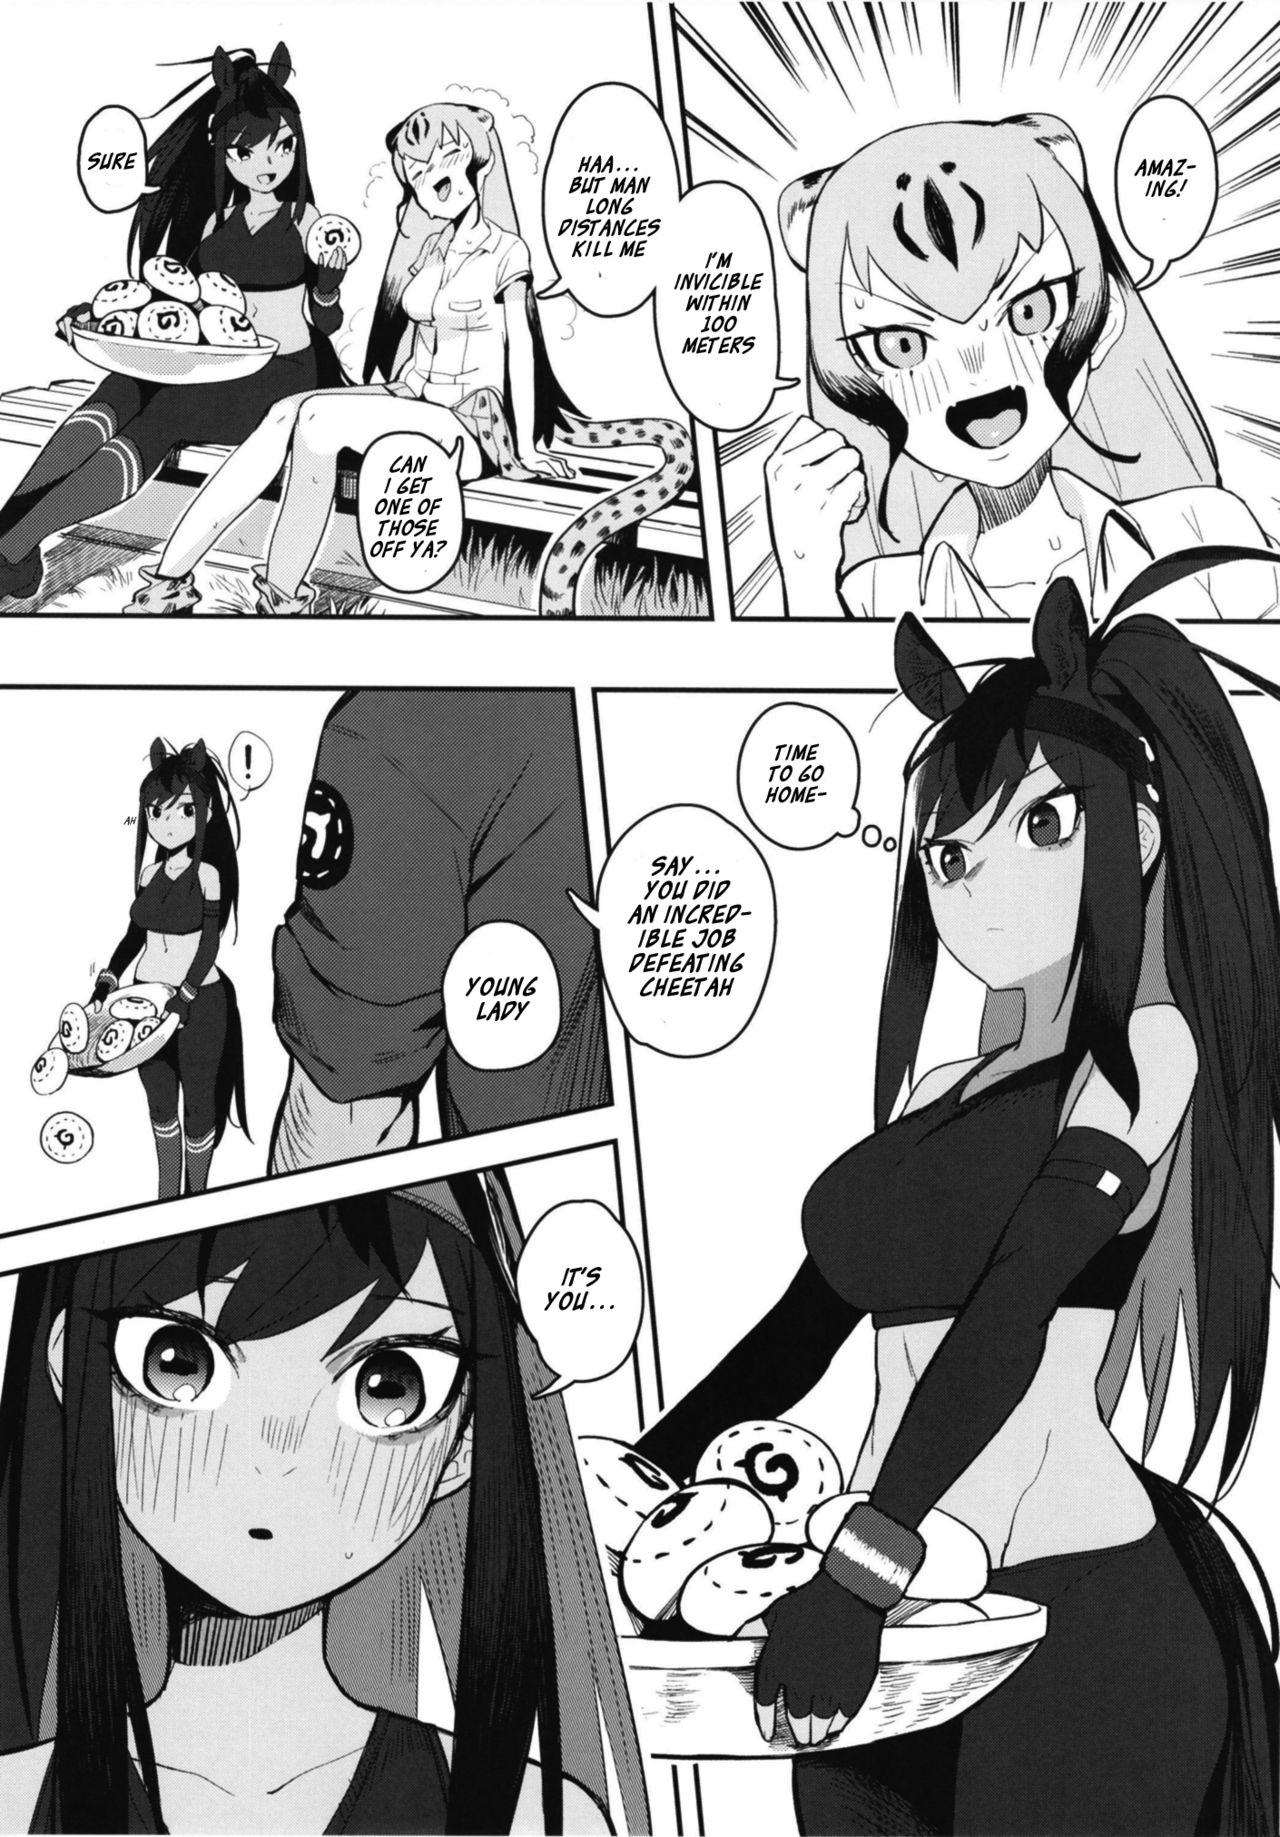 Romance Thoroughbred Early Days 2 - Kemono friends Glamour - Page 7